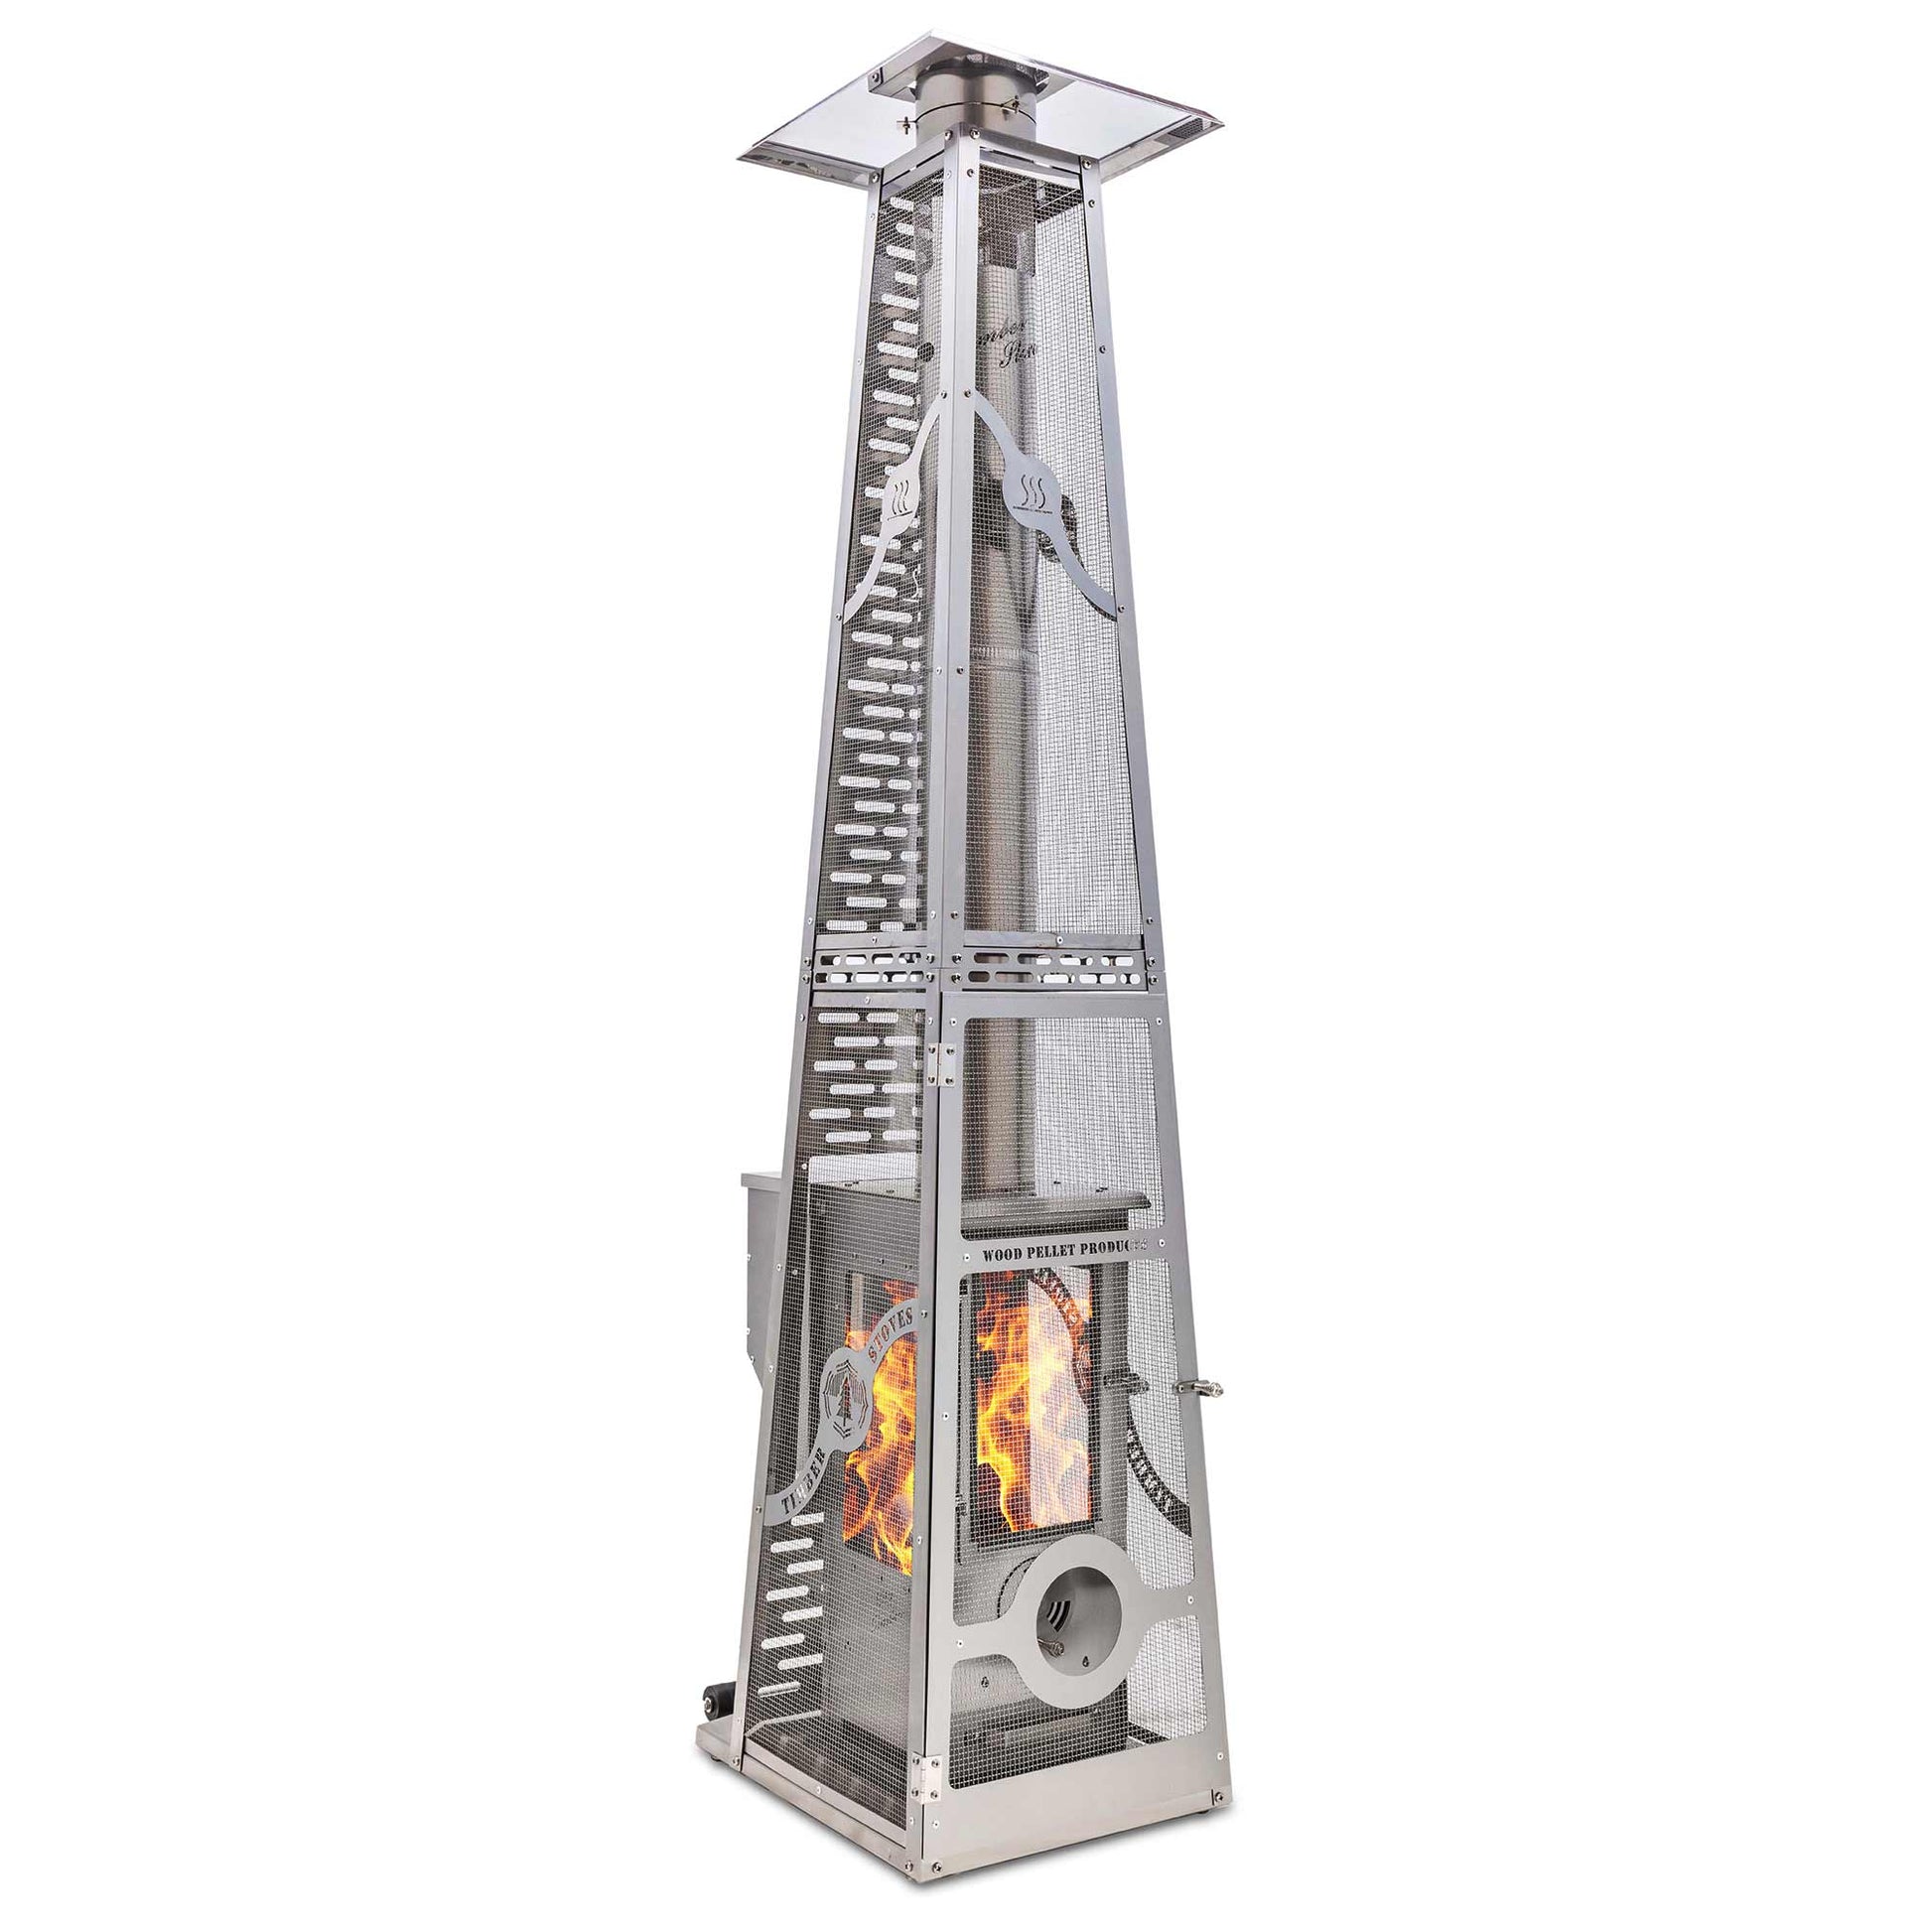 Timber Stoves Stainless Steel Lil' Timber Elite Safety Cage (Cage Only)